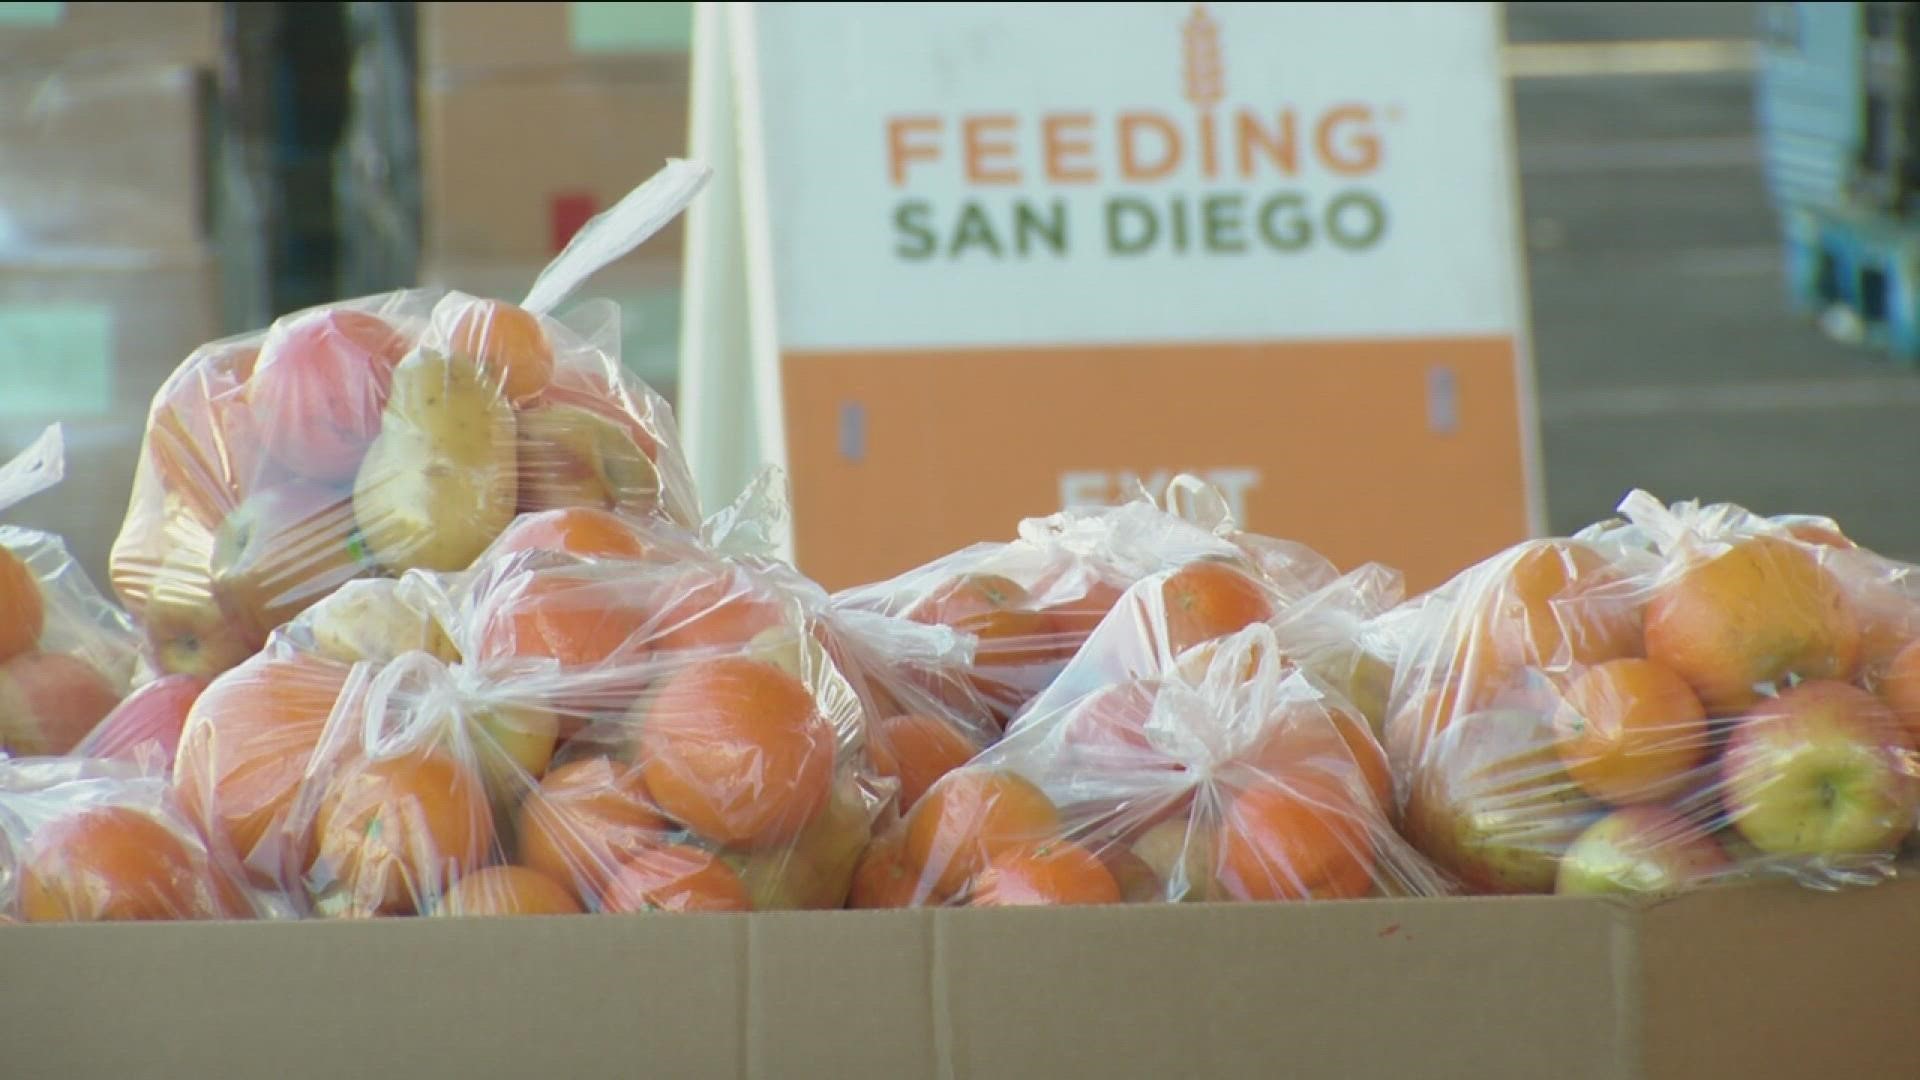 Feeding San Diego says their need is urgent. Volunteers help sort, clean, and pack food that goes out to people experiencing food insecurity.